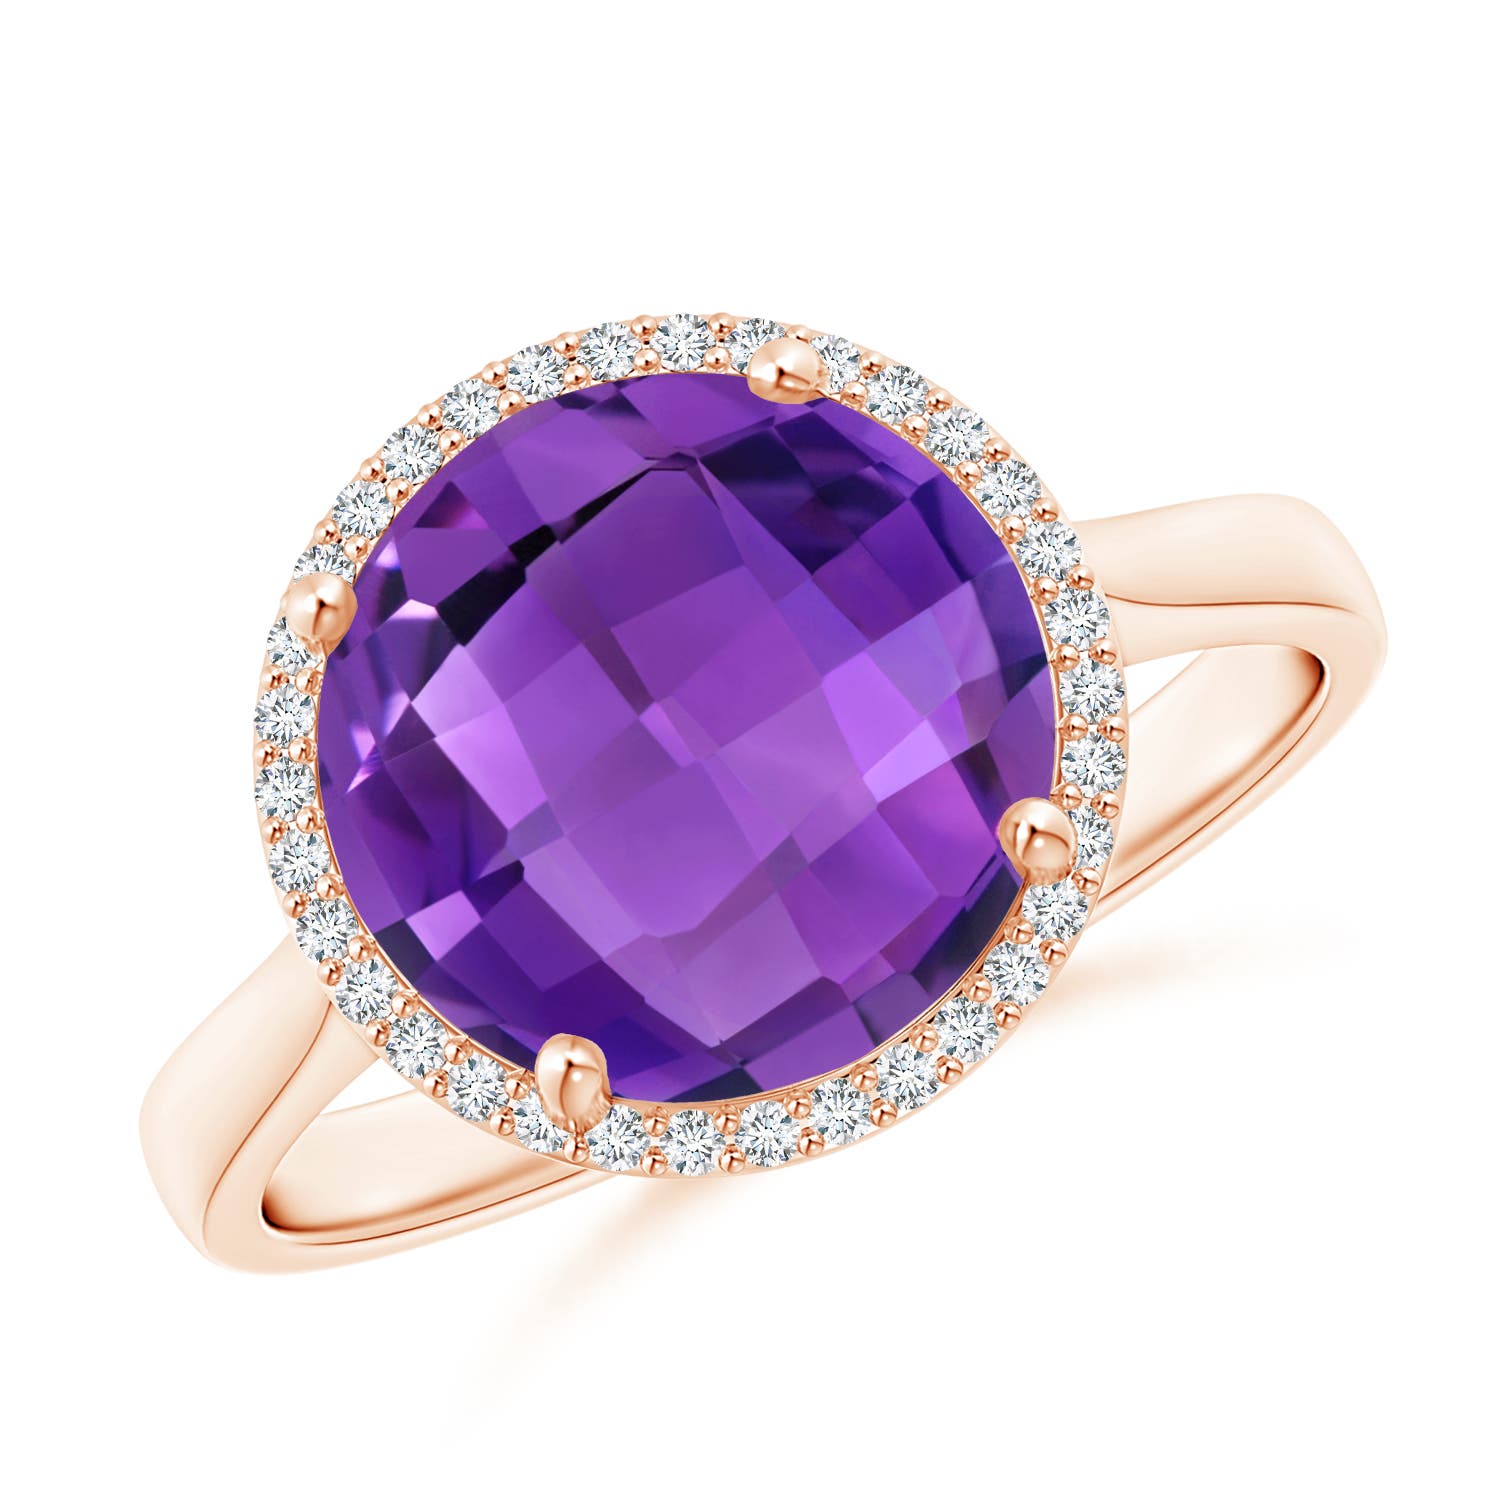 AAA - Amethyst / 3.77 CT / 14 KT Rose Gold